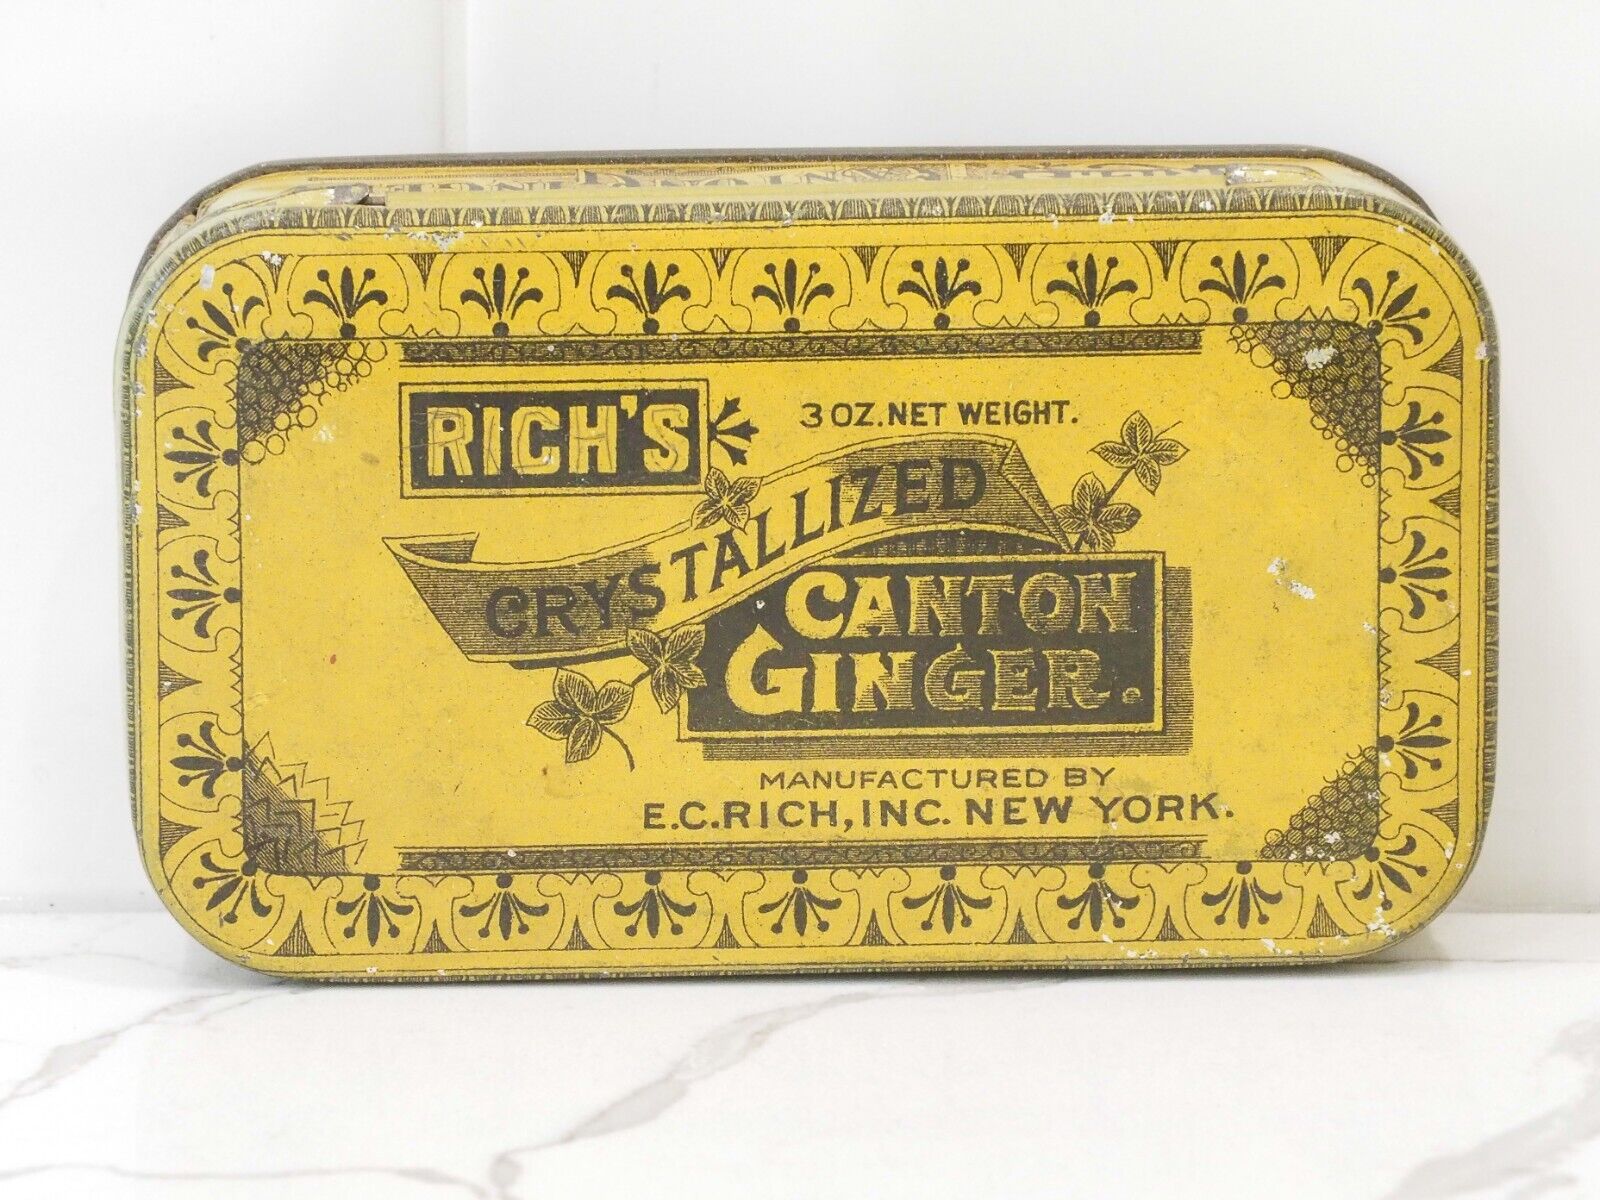 NICE EARLY RICH'S CRYSTALIZED CANTON GINGER TIN E. C. RICH INC. NEW YORK 3oz